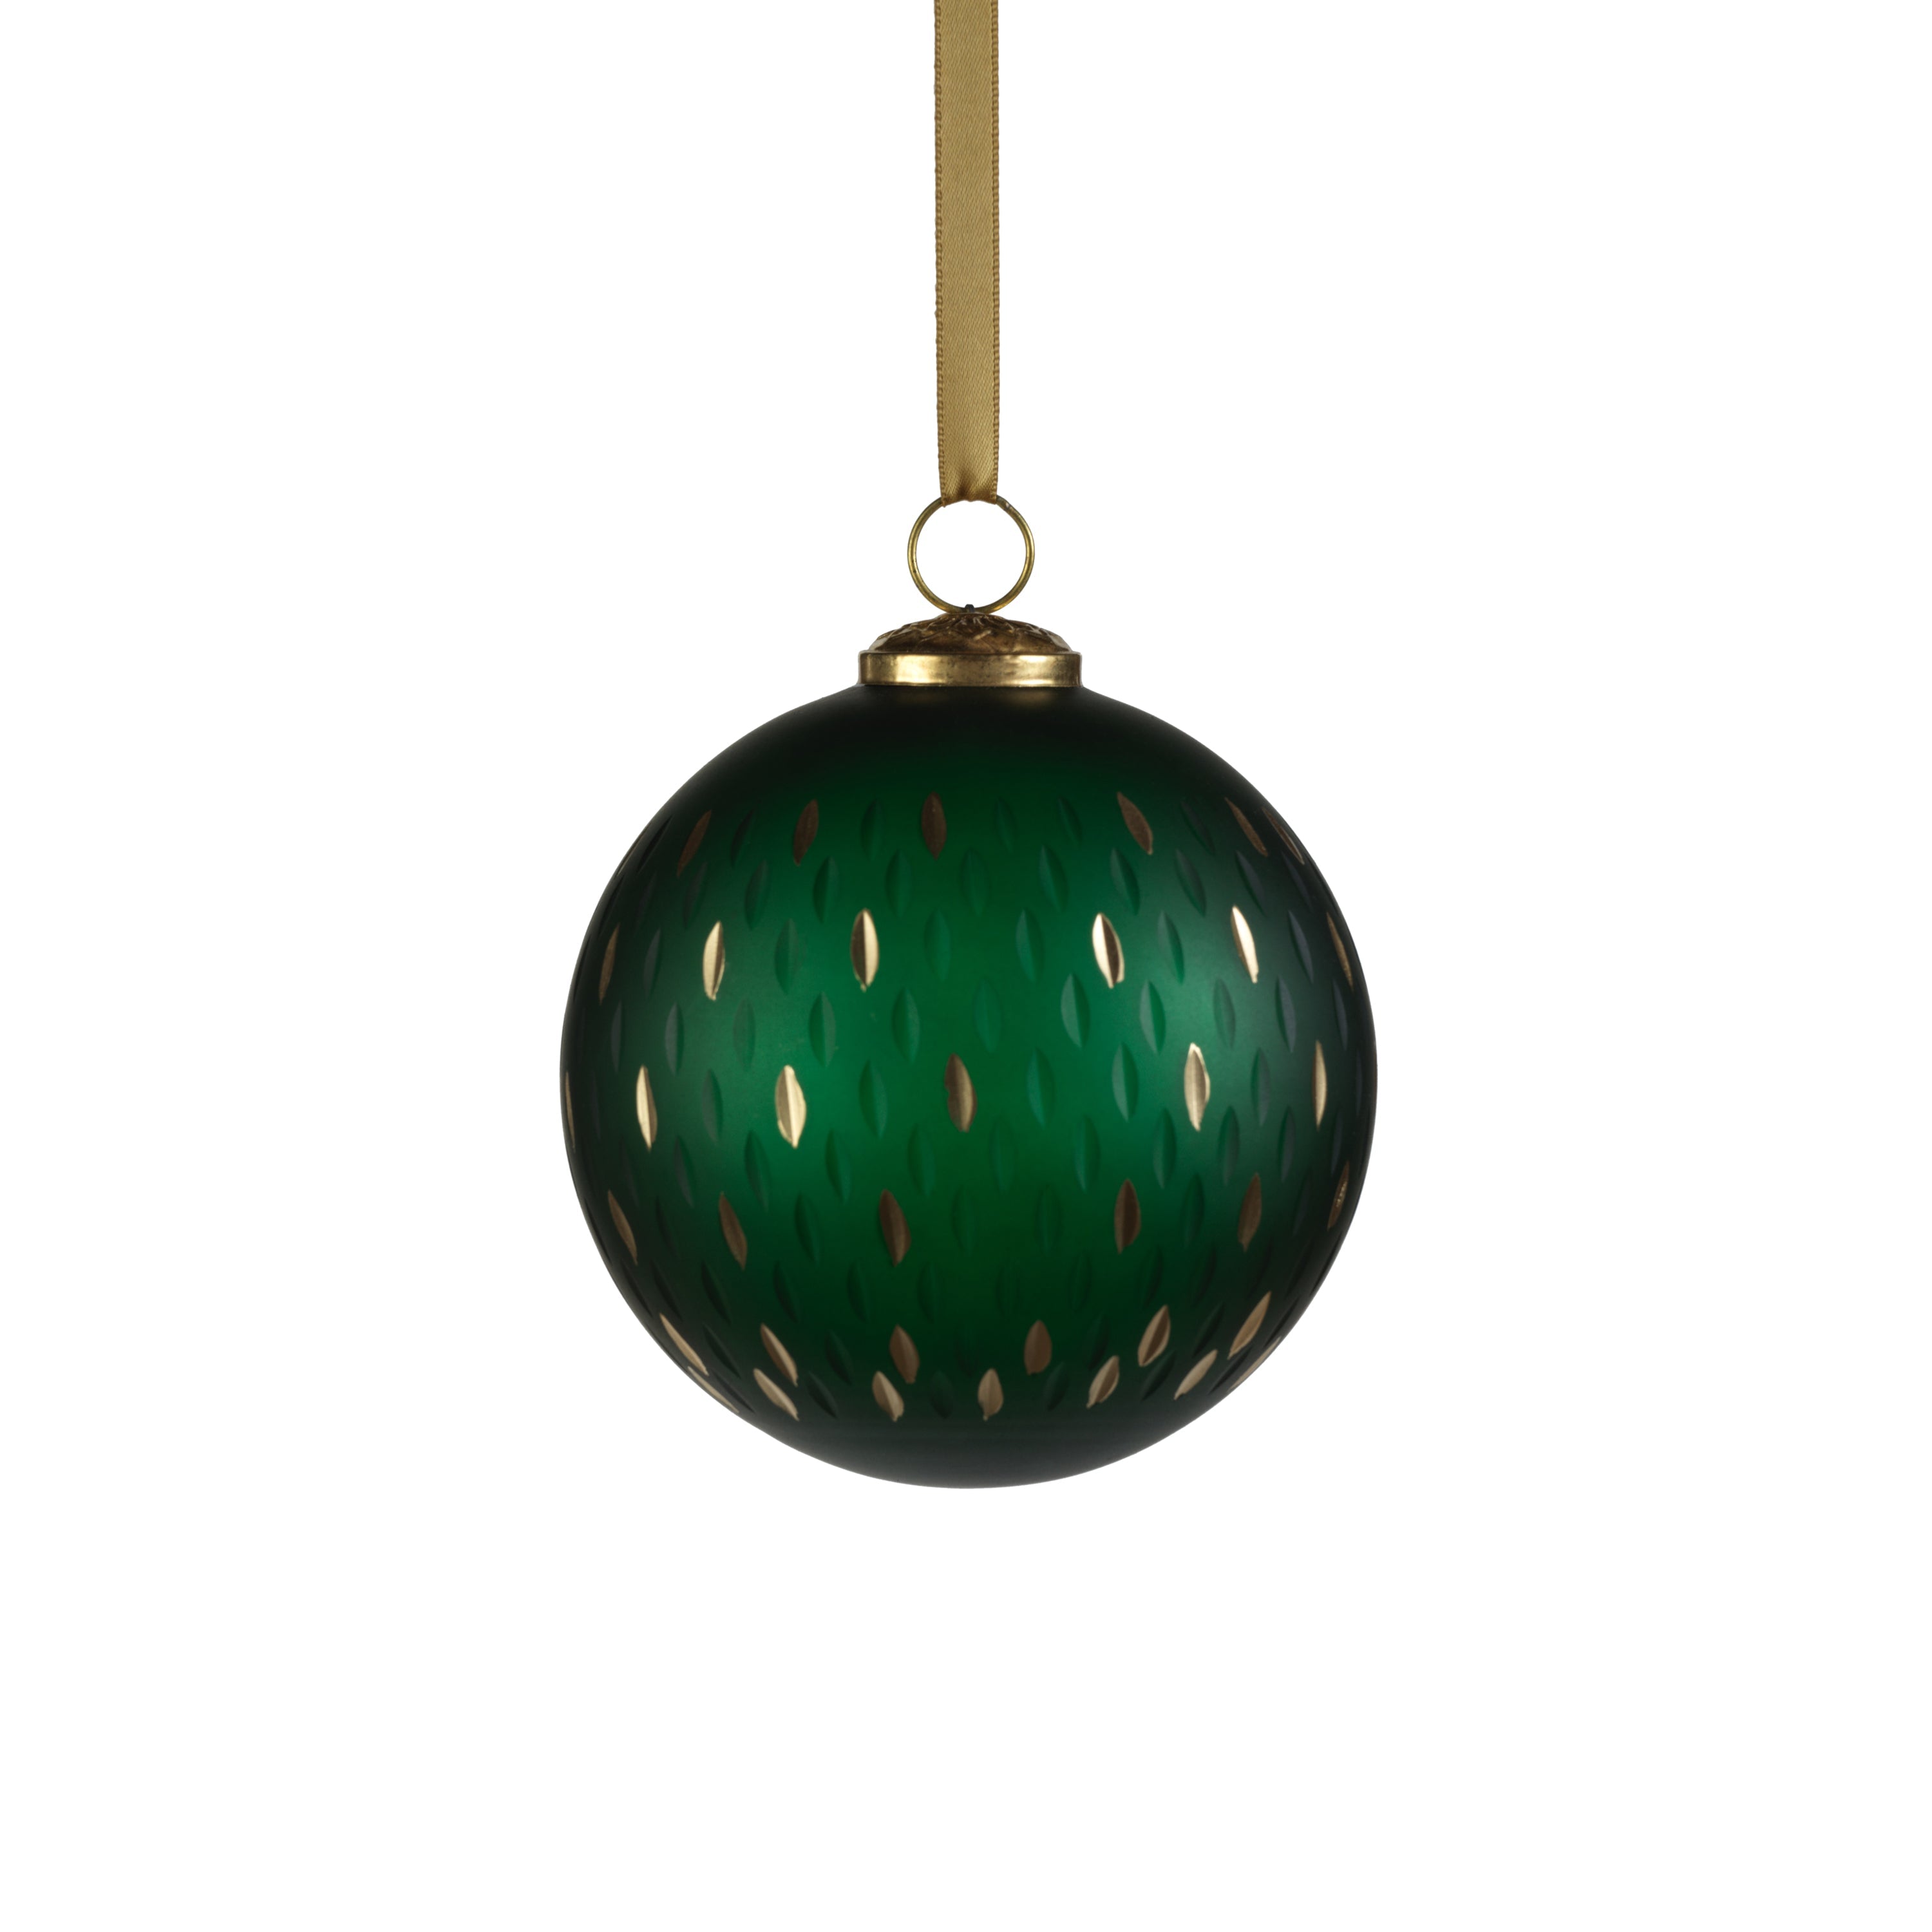 Frosted & Etched in Gold Glass Ornament - Green